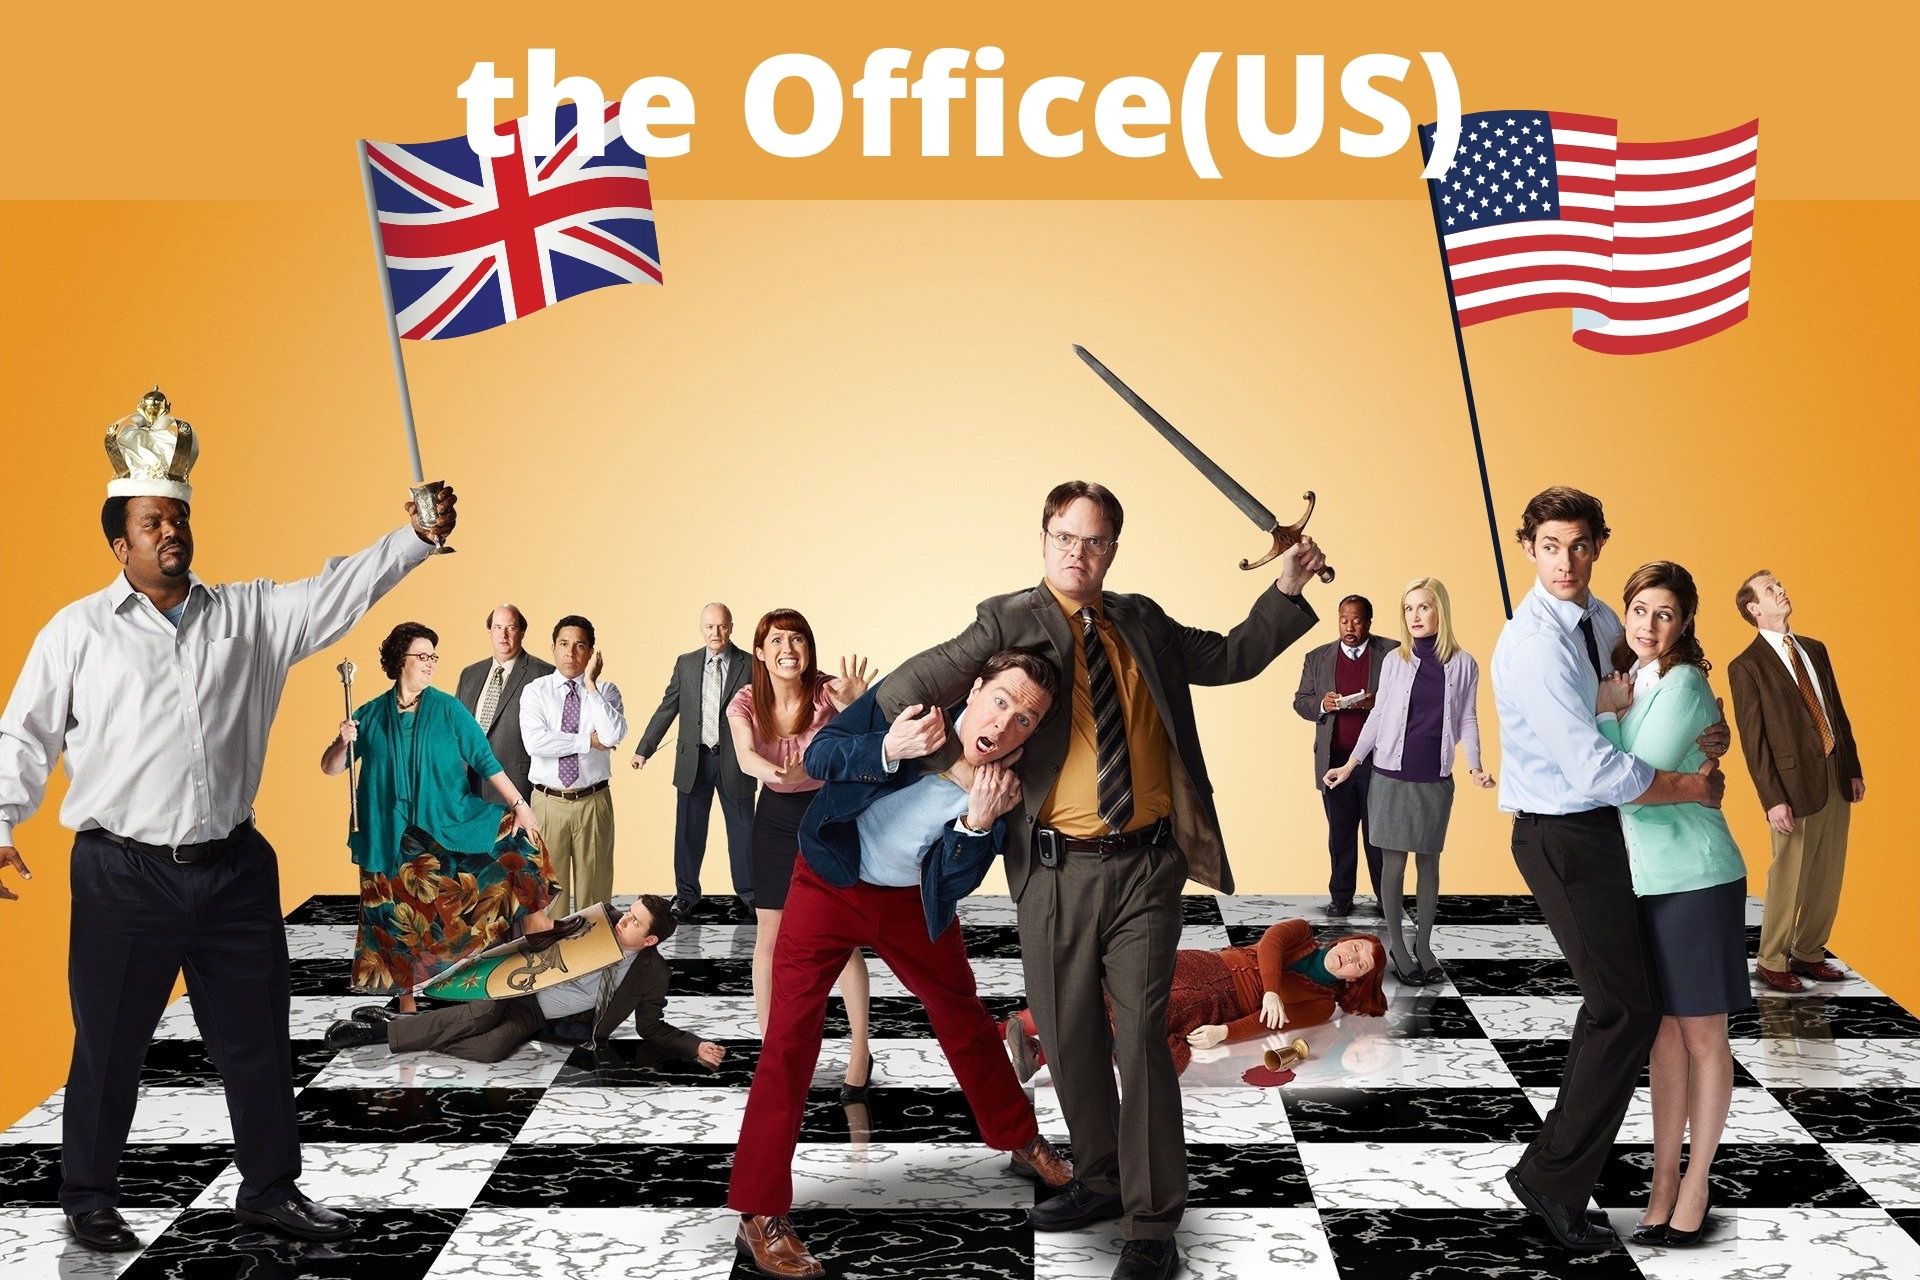 How to watch The Office US in the UK